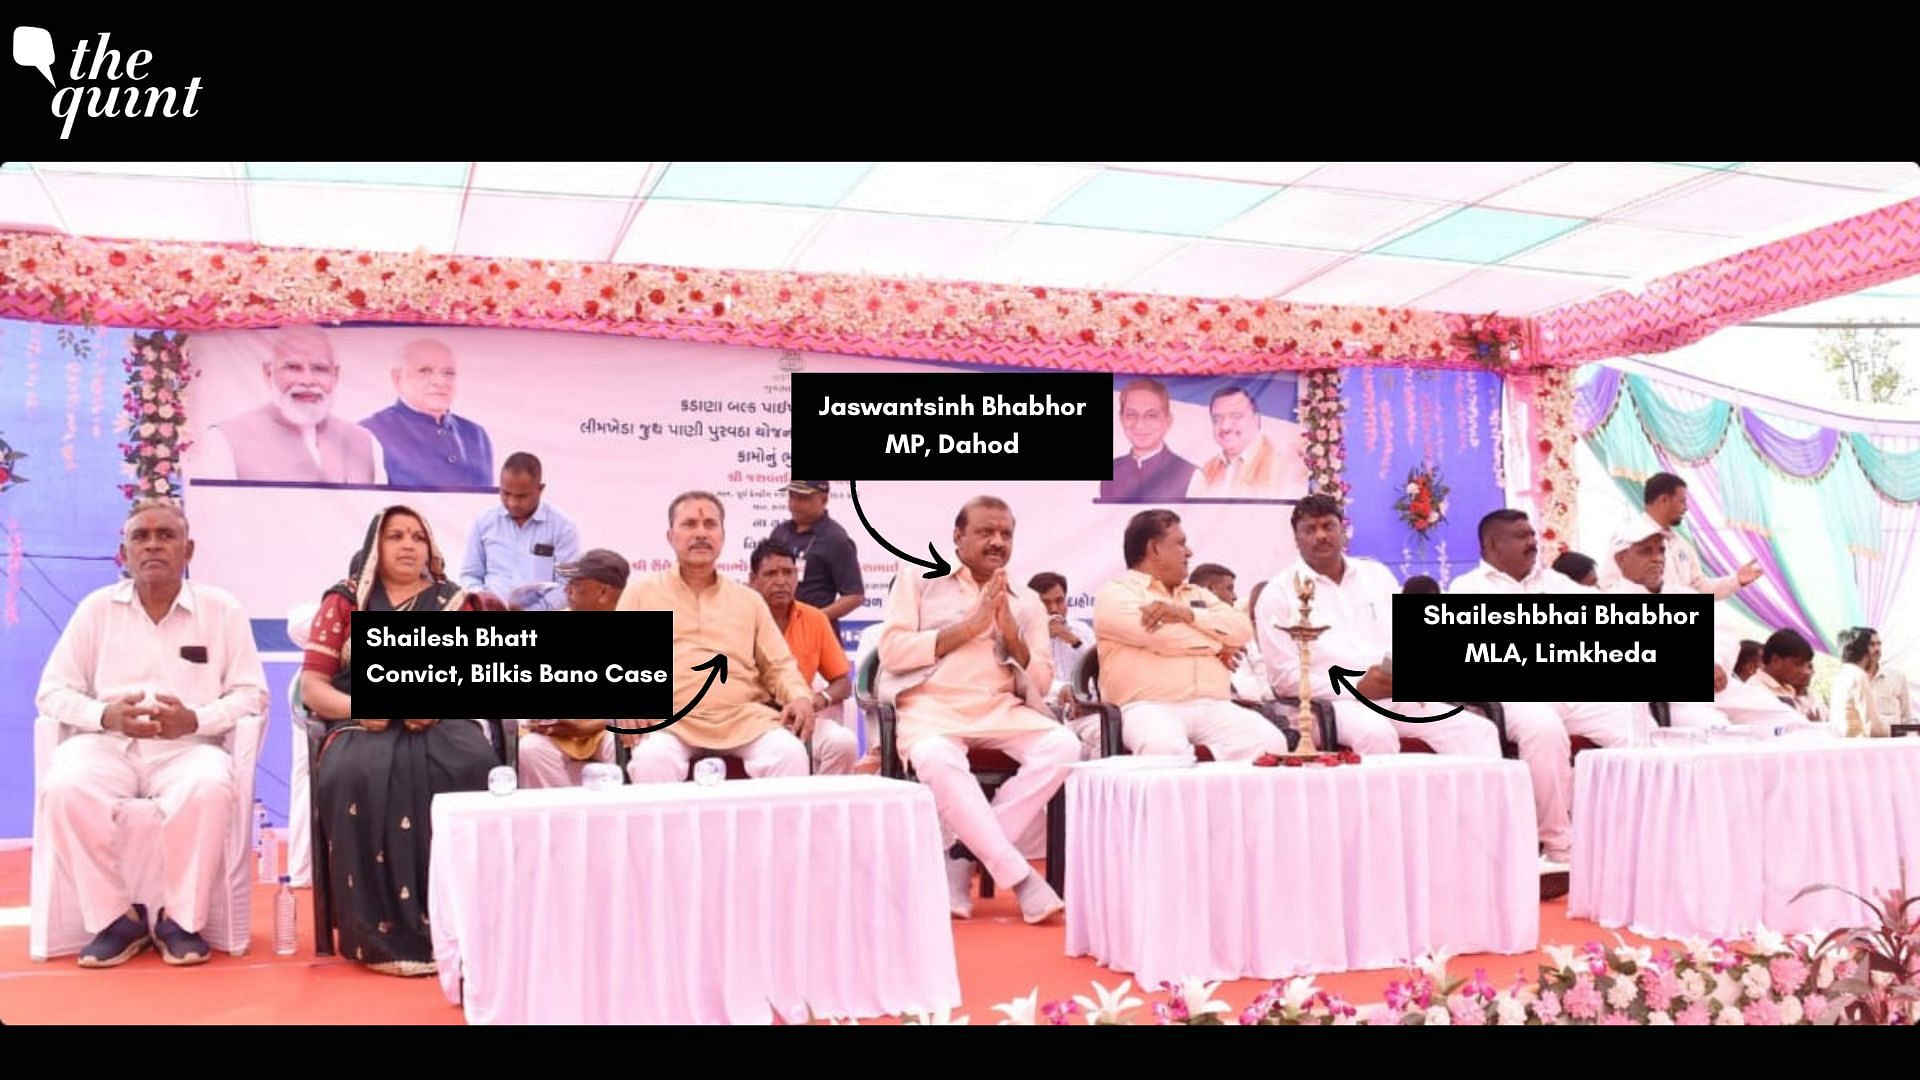 <div class="paragraphs"><p>Bharatiya Janata Party (BJP) MP from Gujarat's Dahod — Jaswantsinh Bhabhor, was seen sharing stage with Shailesh Bhatt — one of the 11 convicts in the 2002 <a href="https://www.thequint.com/topic/bilkis-bano">Bilkis Bano gangrape and murder case</a>.&nbsp;</p></div>